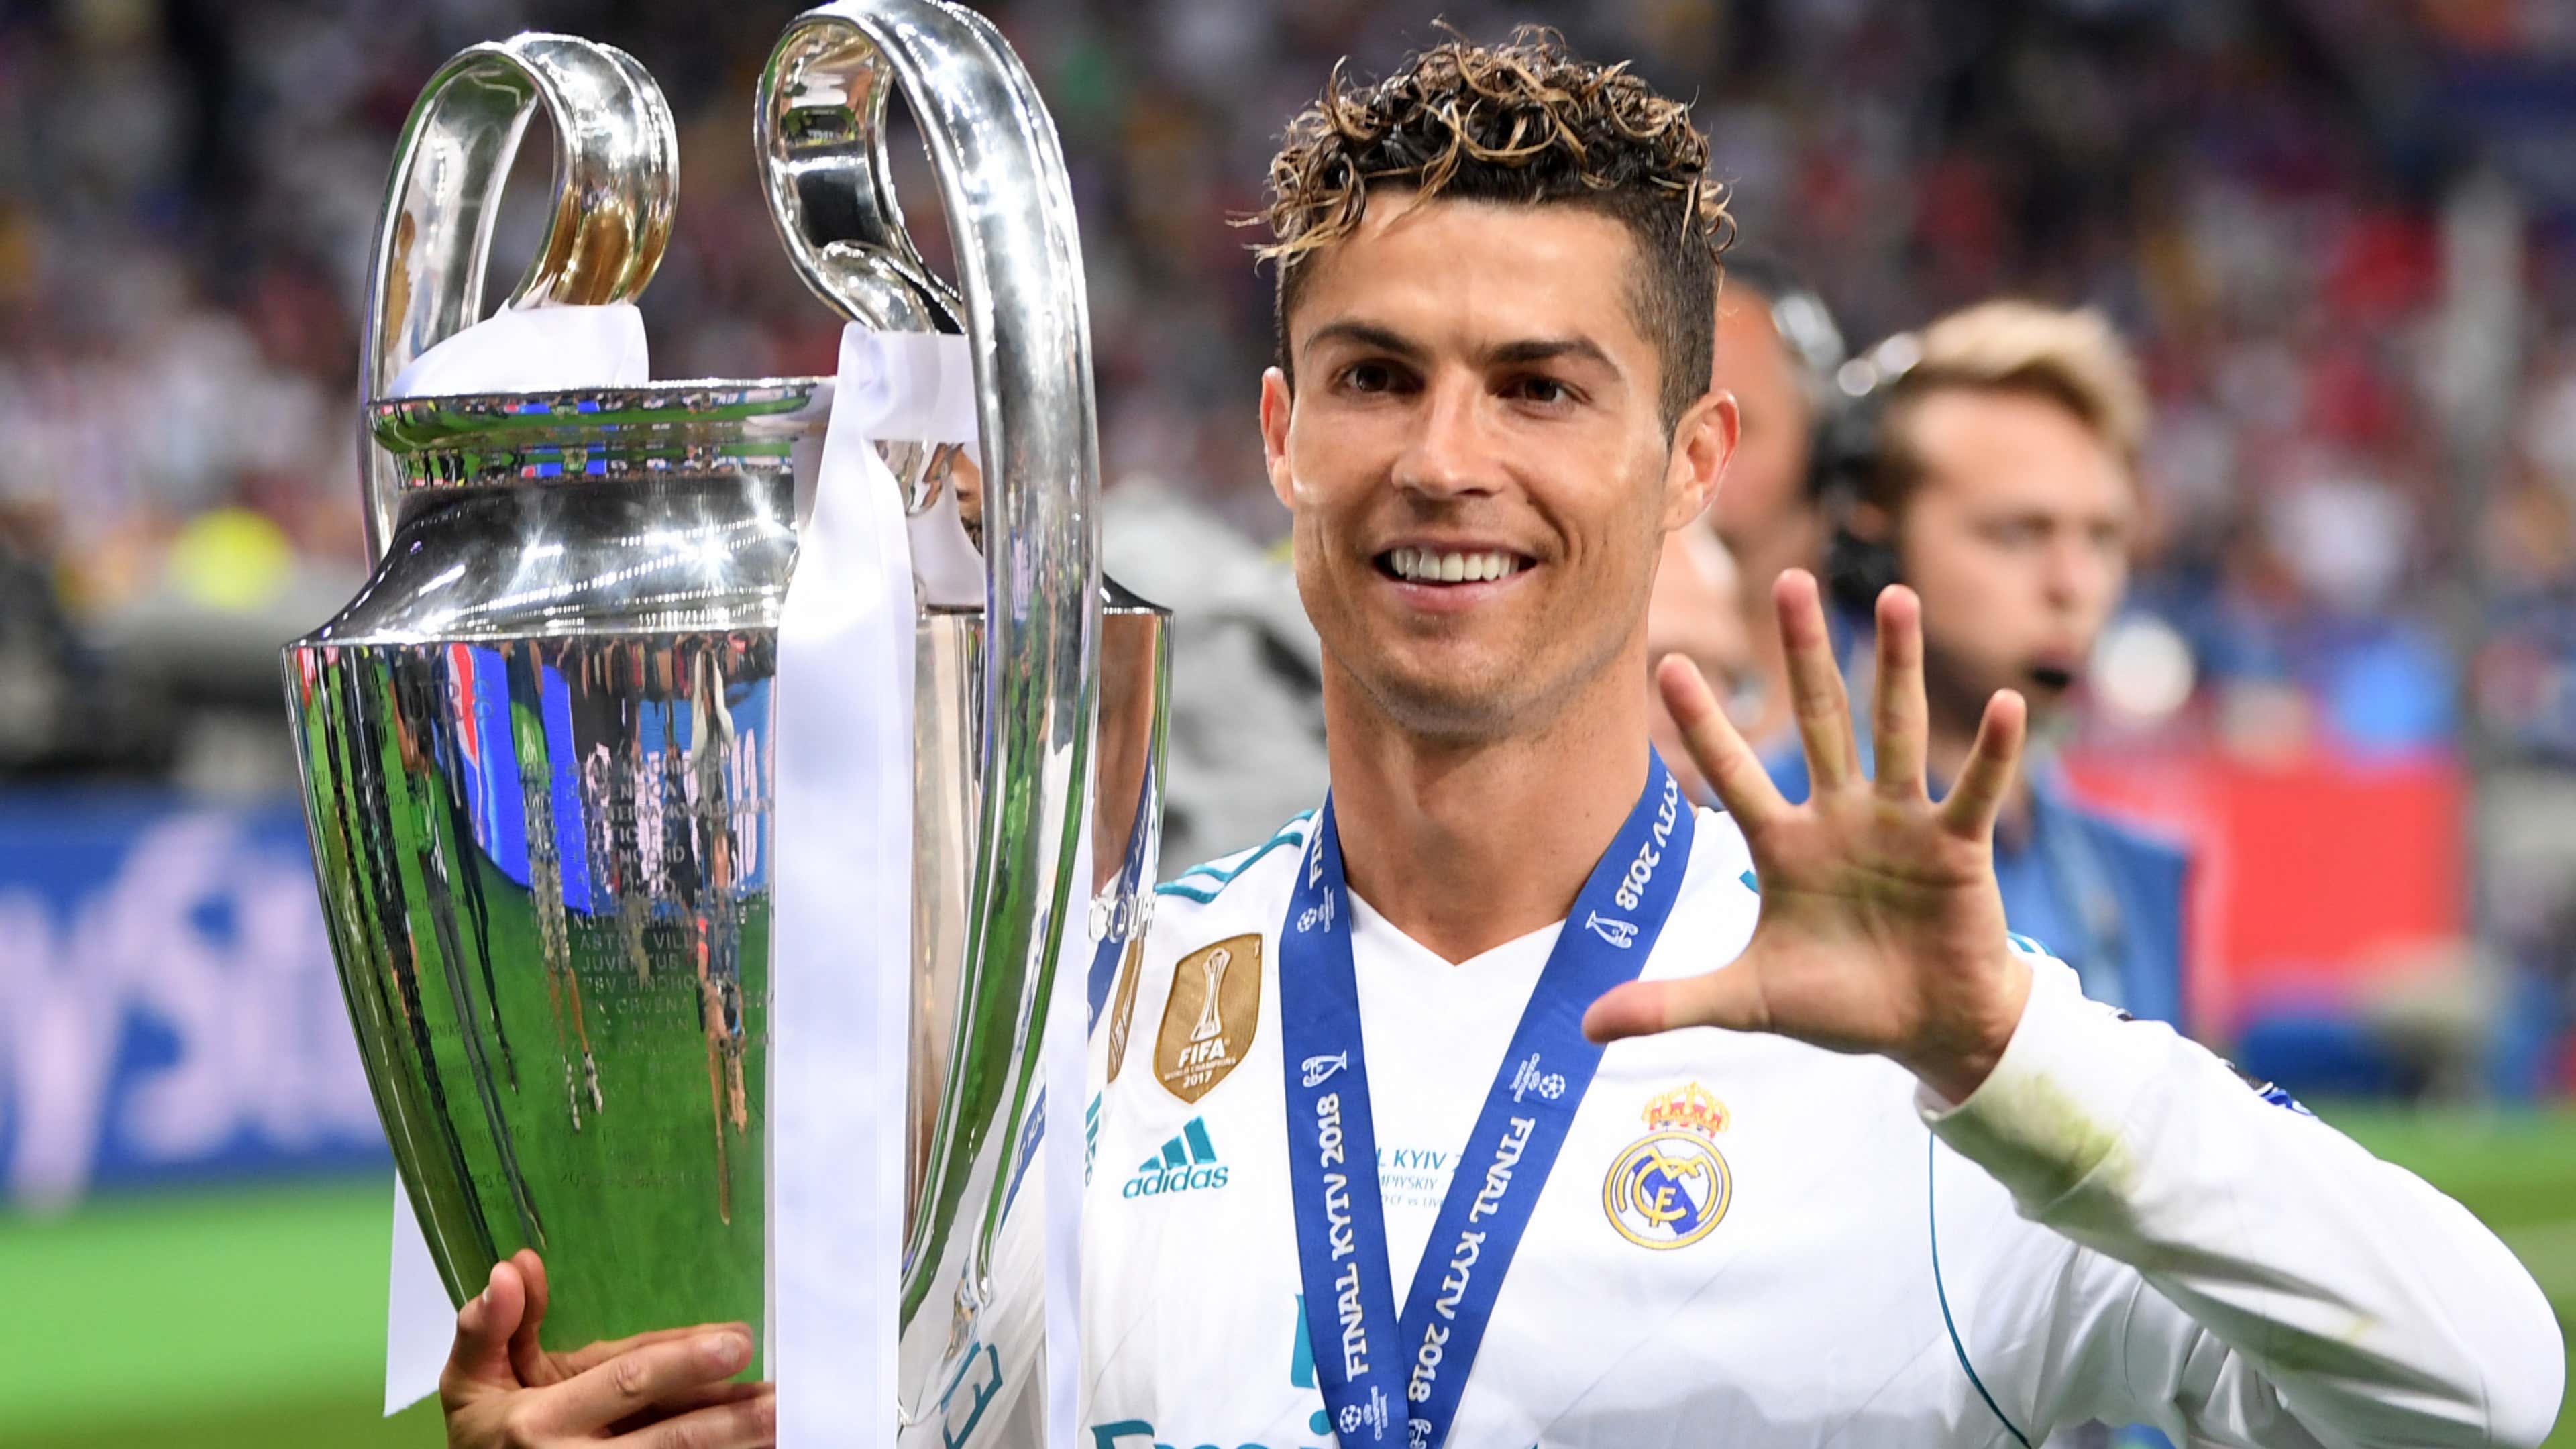 Would Cristiano Ronaldo trade Champions League trophies for World Cup win?  Portuguese superstar faces lie detector test